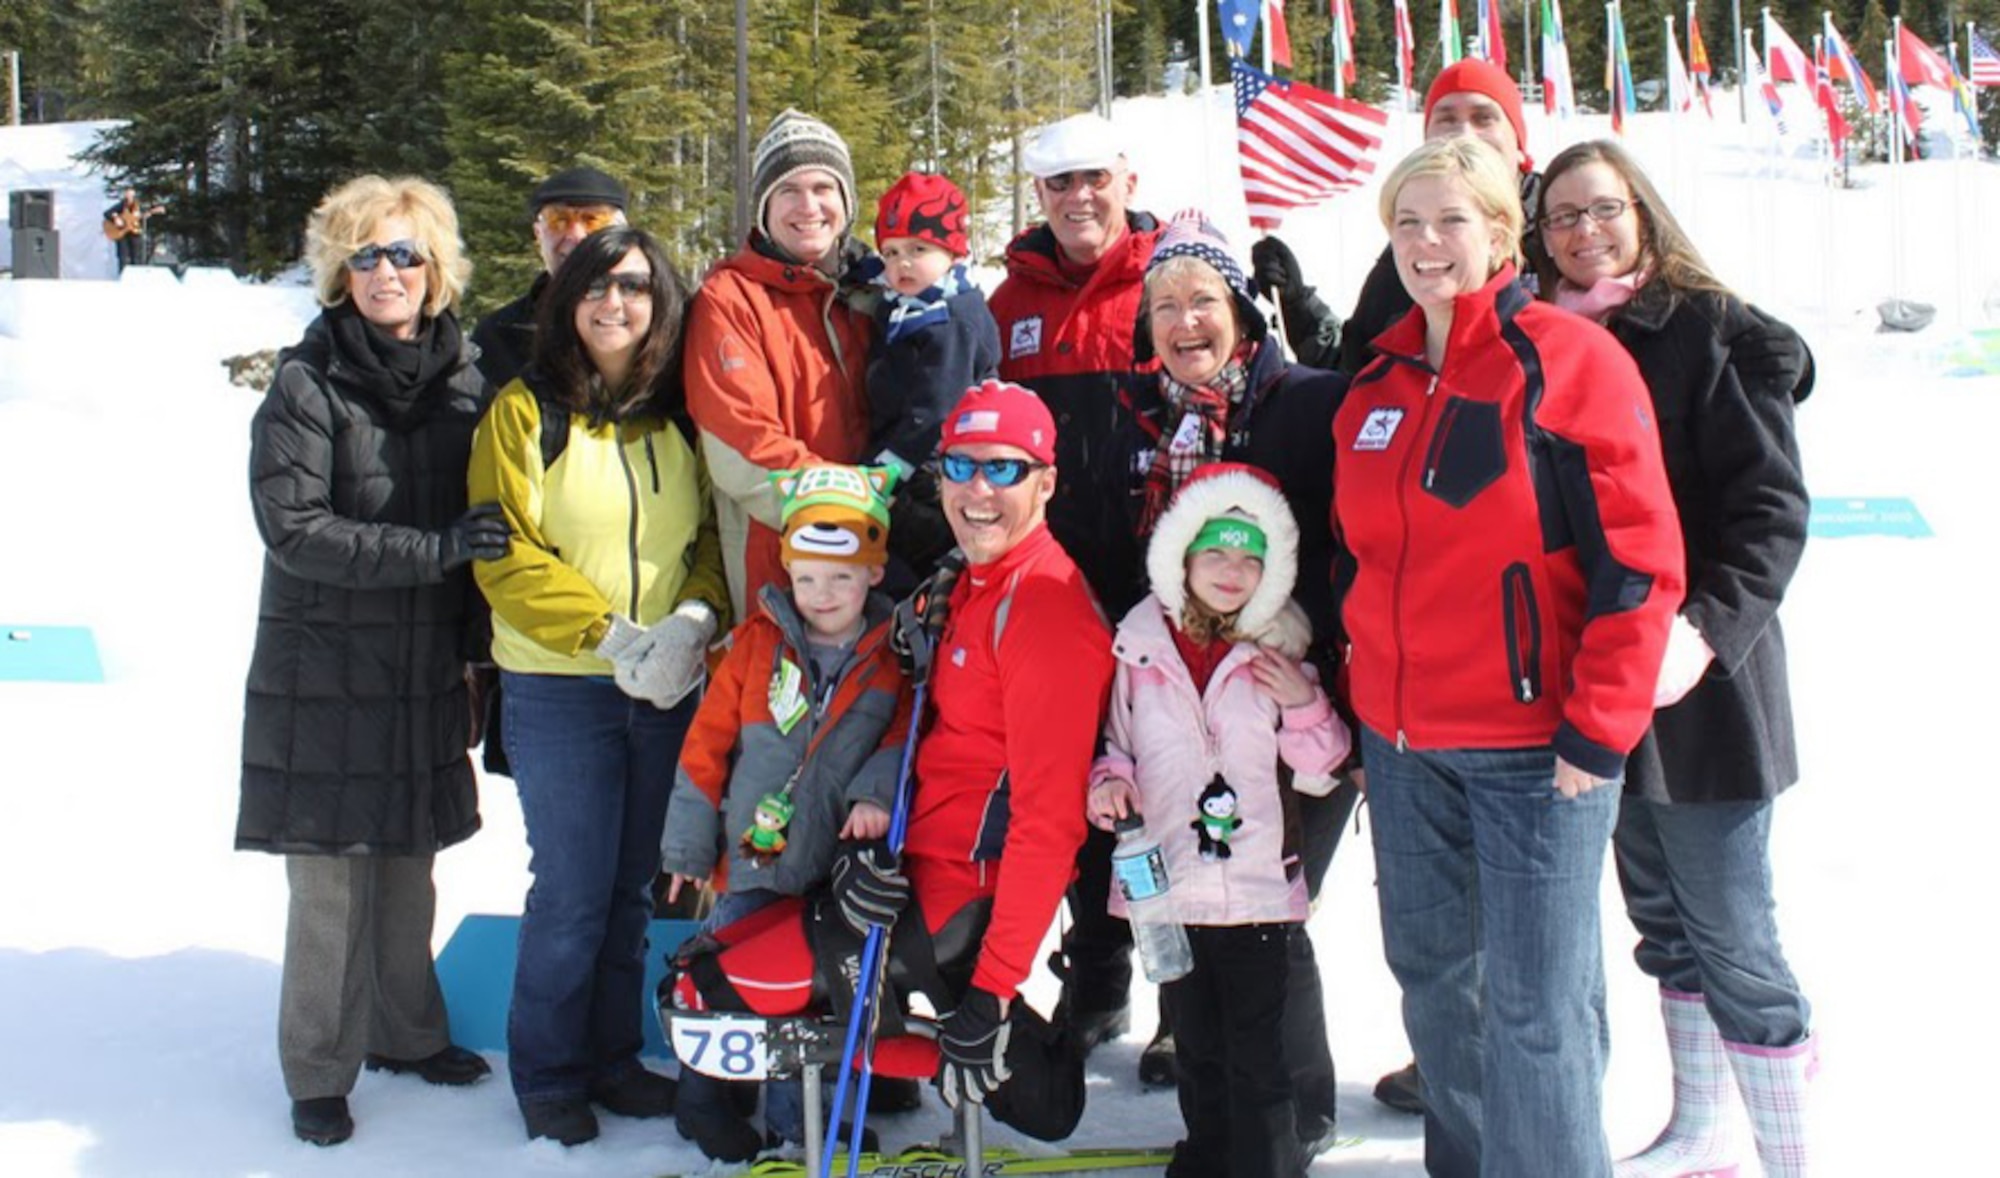 Surrounded by his family, Sean Halsted poses for a picture during the 2010 Vancouver Paralympic Winter Games.   Halsted, a former senior airman, was injured during a training exercise in 1998.  He is scheduled to compete in the Sochi Paralympic Winter Games starting on March 6, 2014. (Courtesy photo/Tech. Sgt. Regan Halsted)